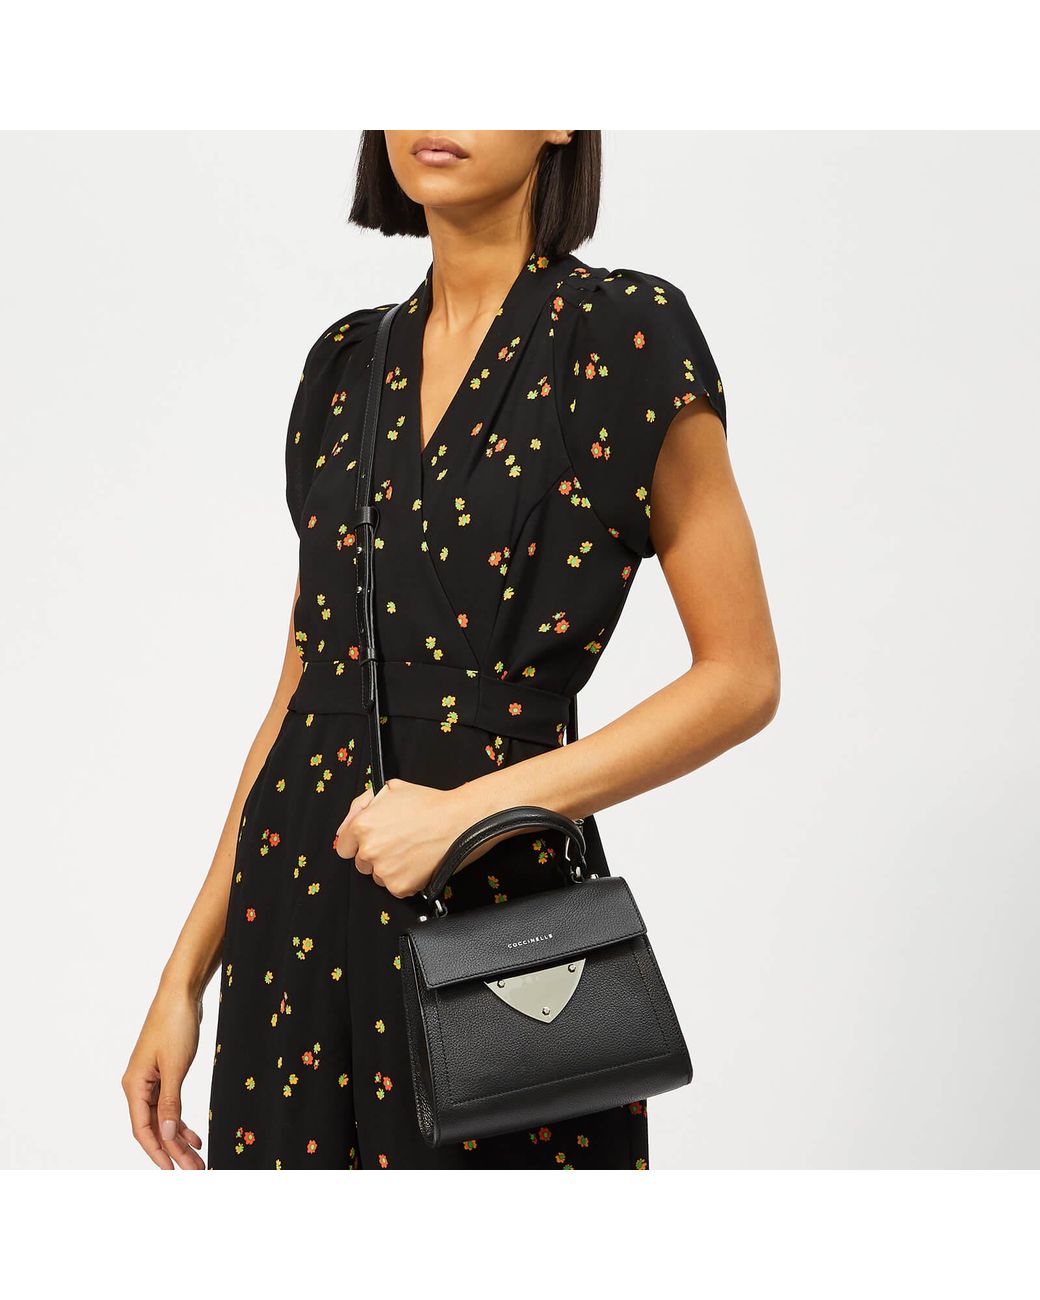 Coccinelle B14 Tote Bag in Black | Lyst